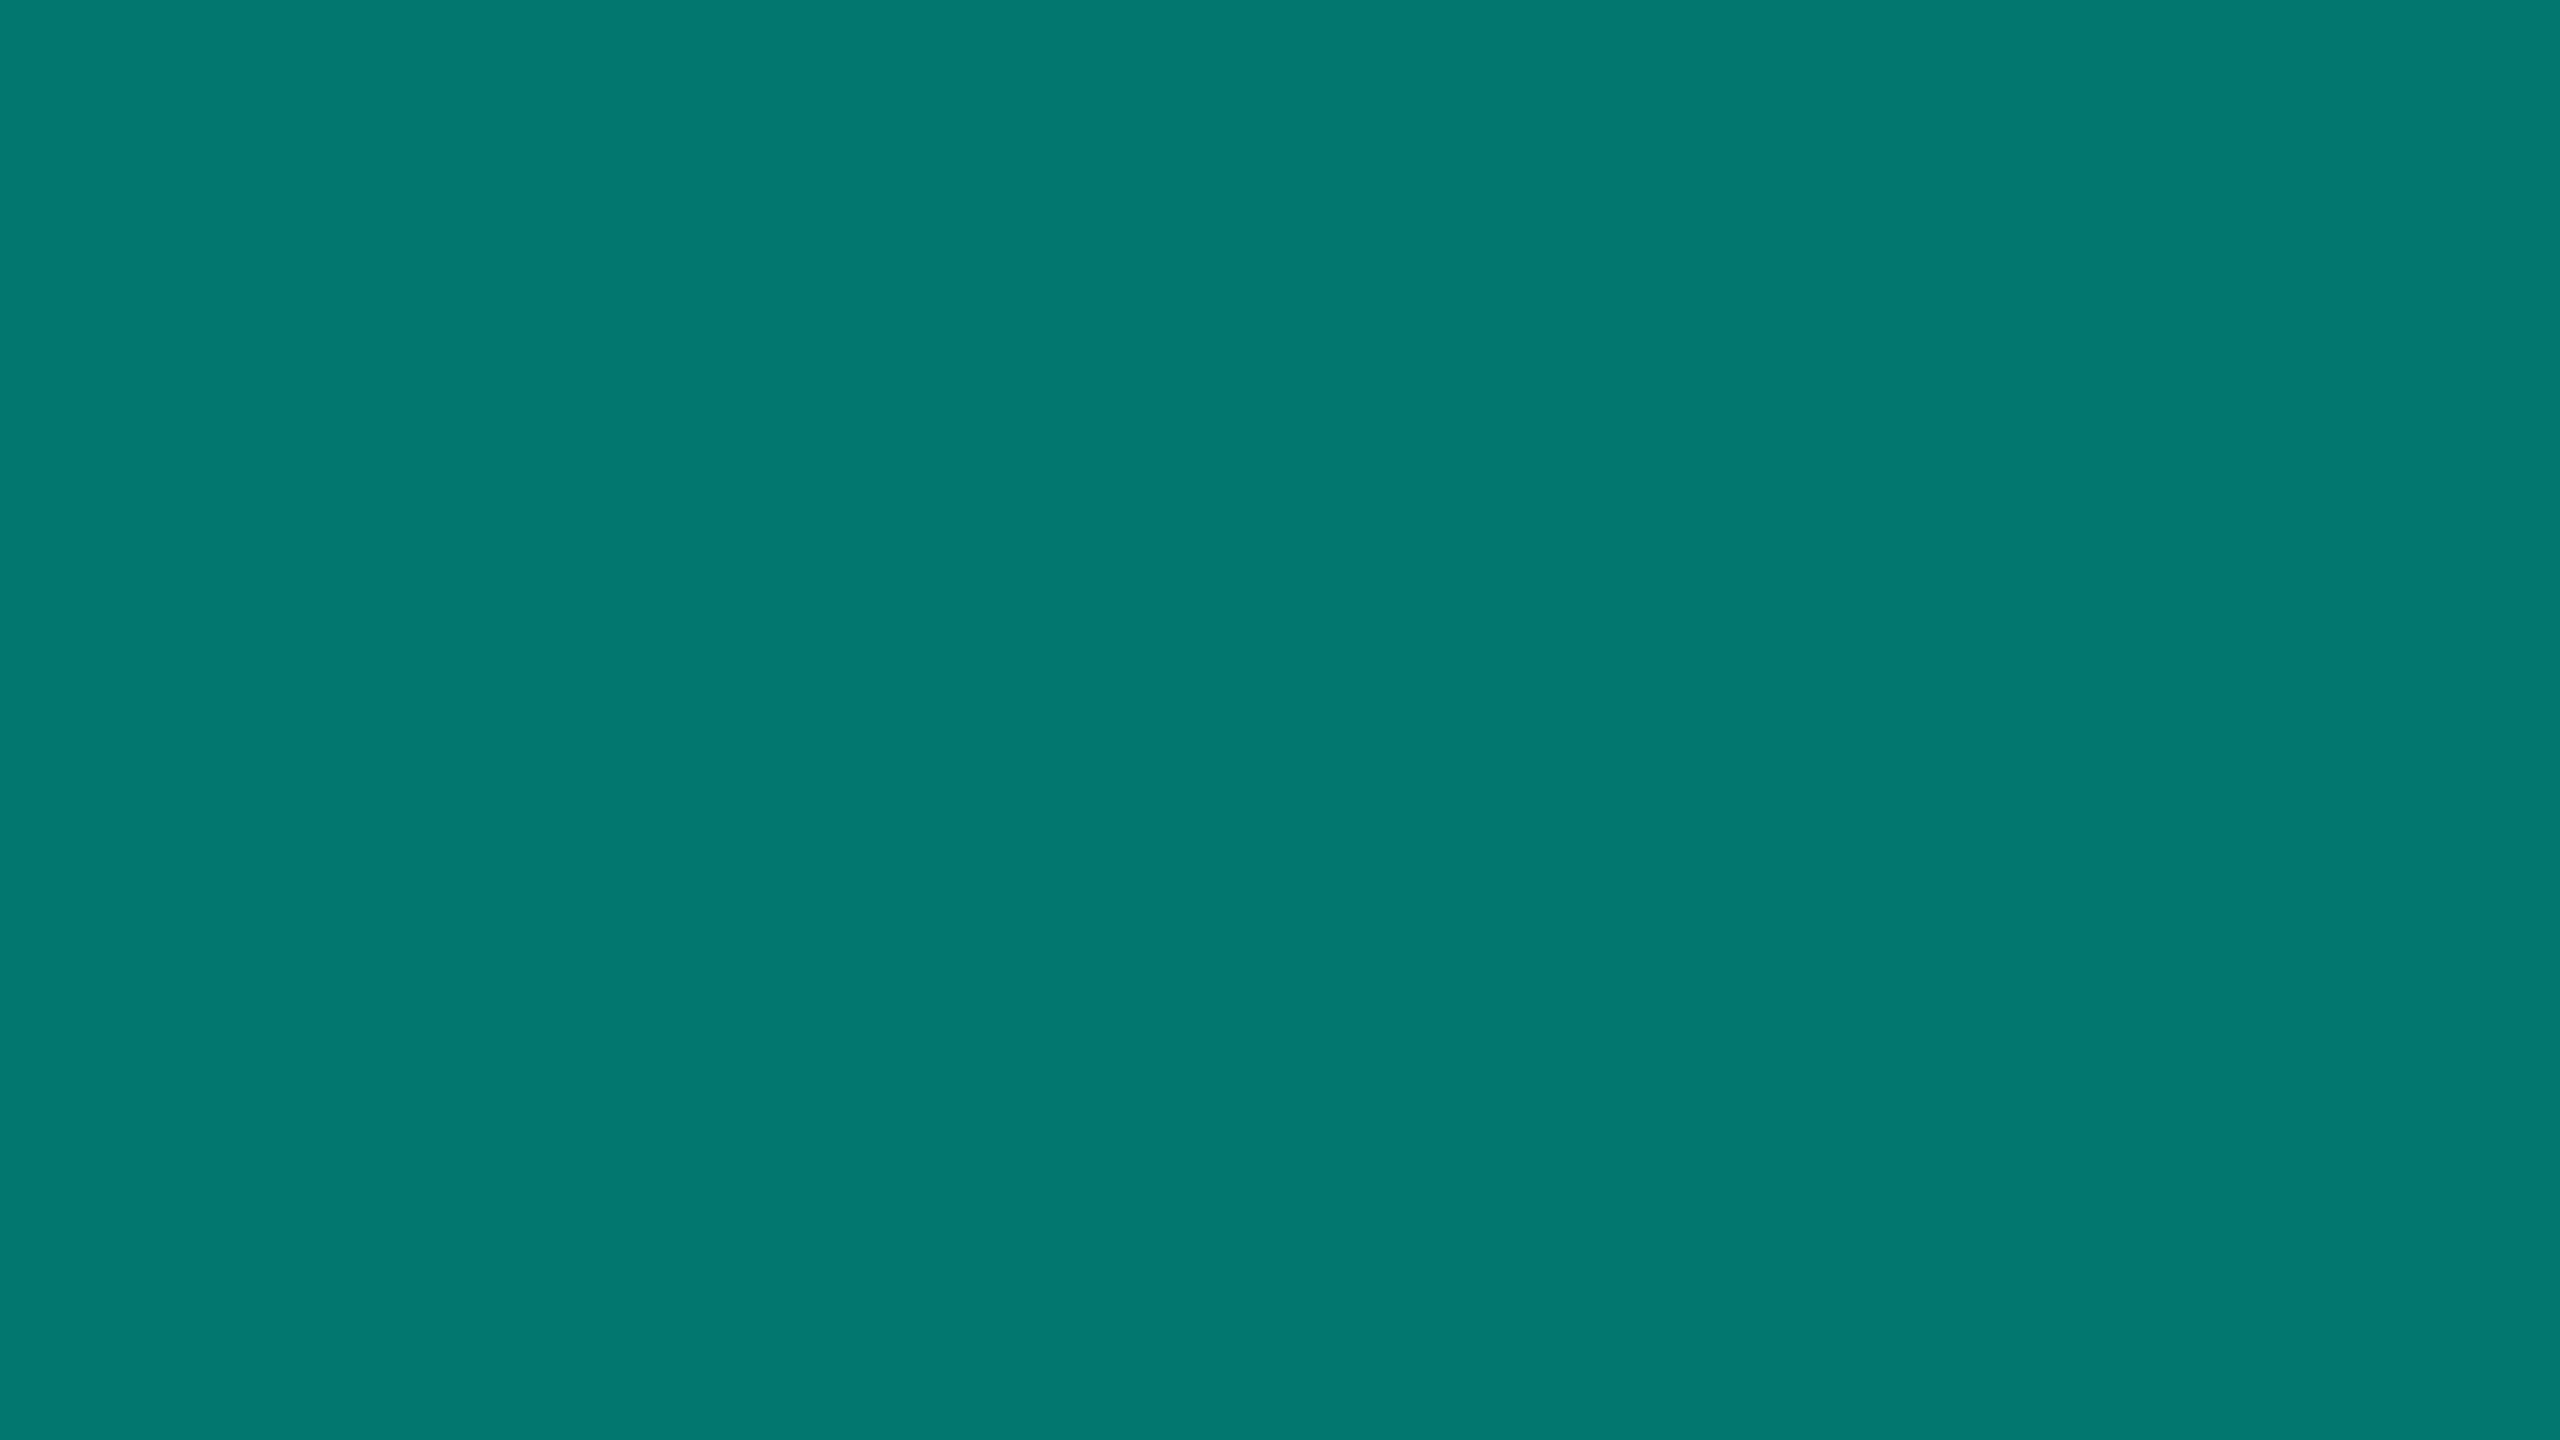 2560x1440 Pine Green Solid Color Background